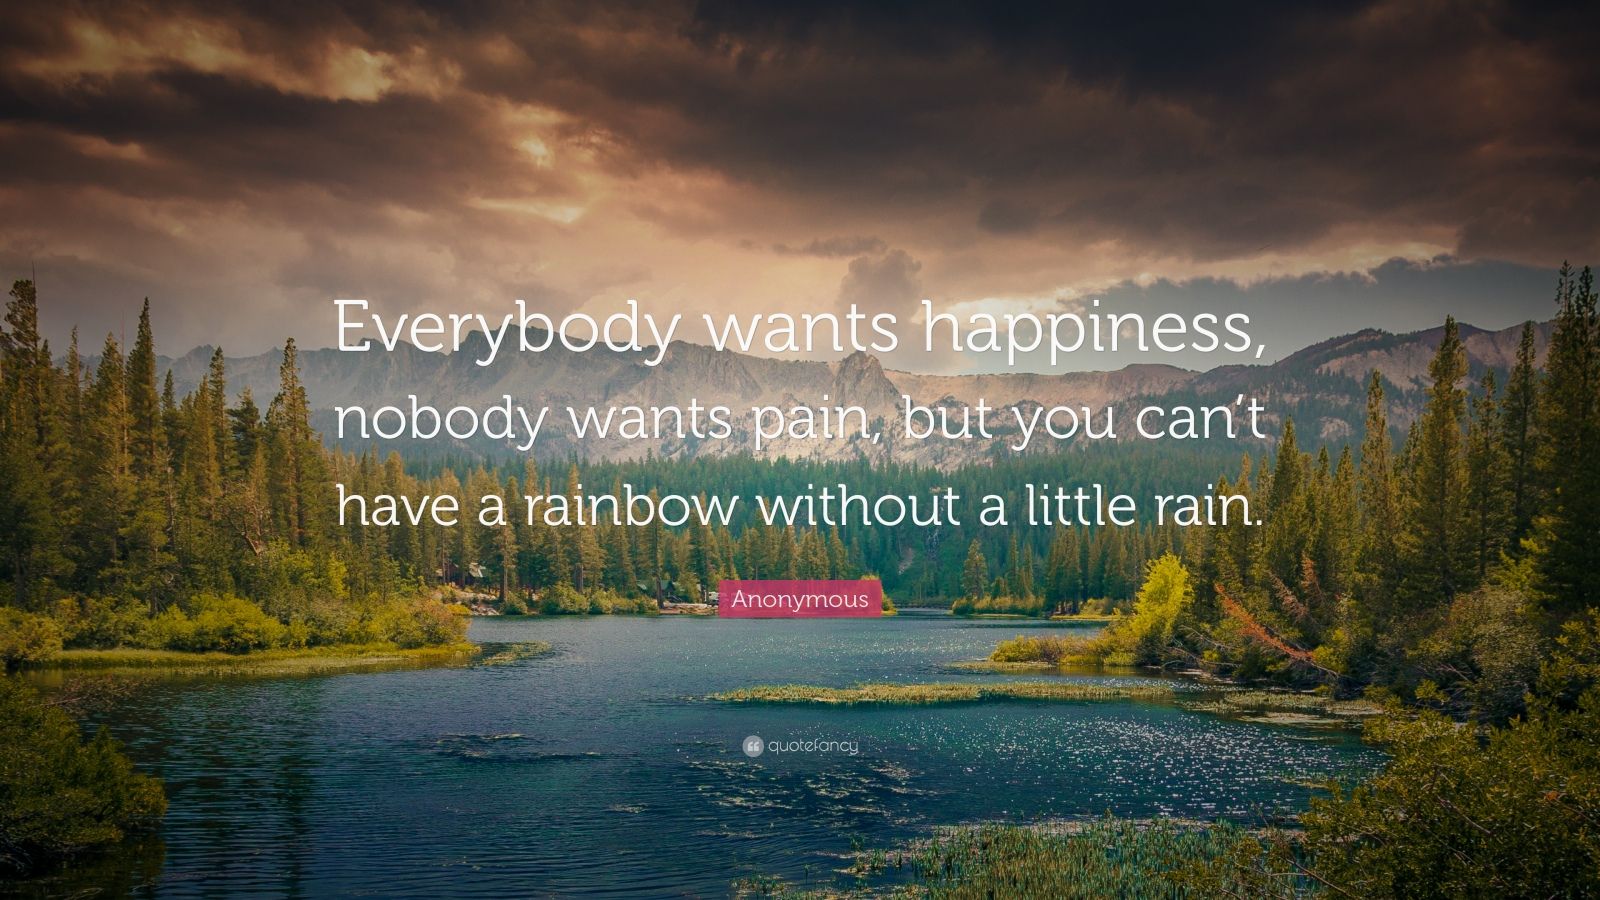 Anonymous Quote: “Everybody wants happiness, nobody wants pain, but you